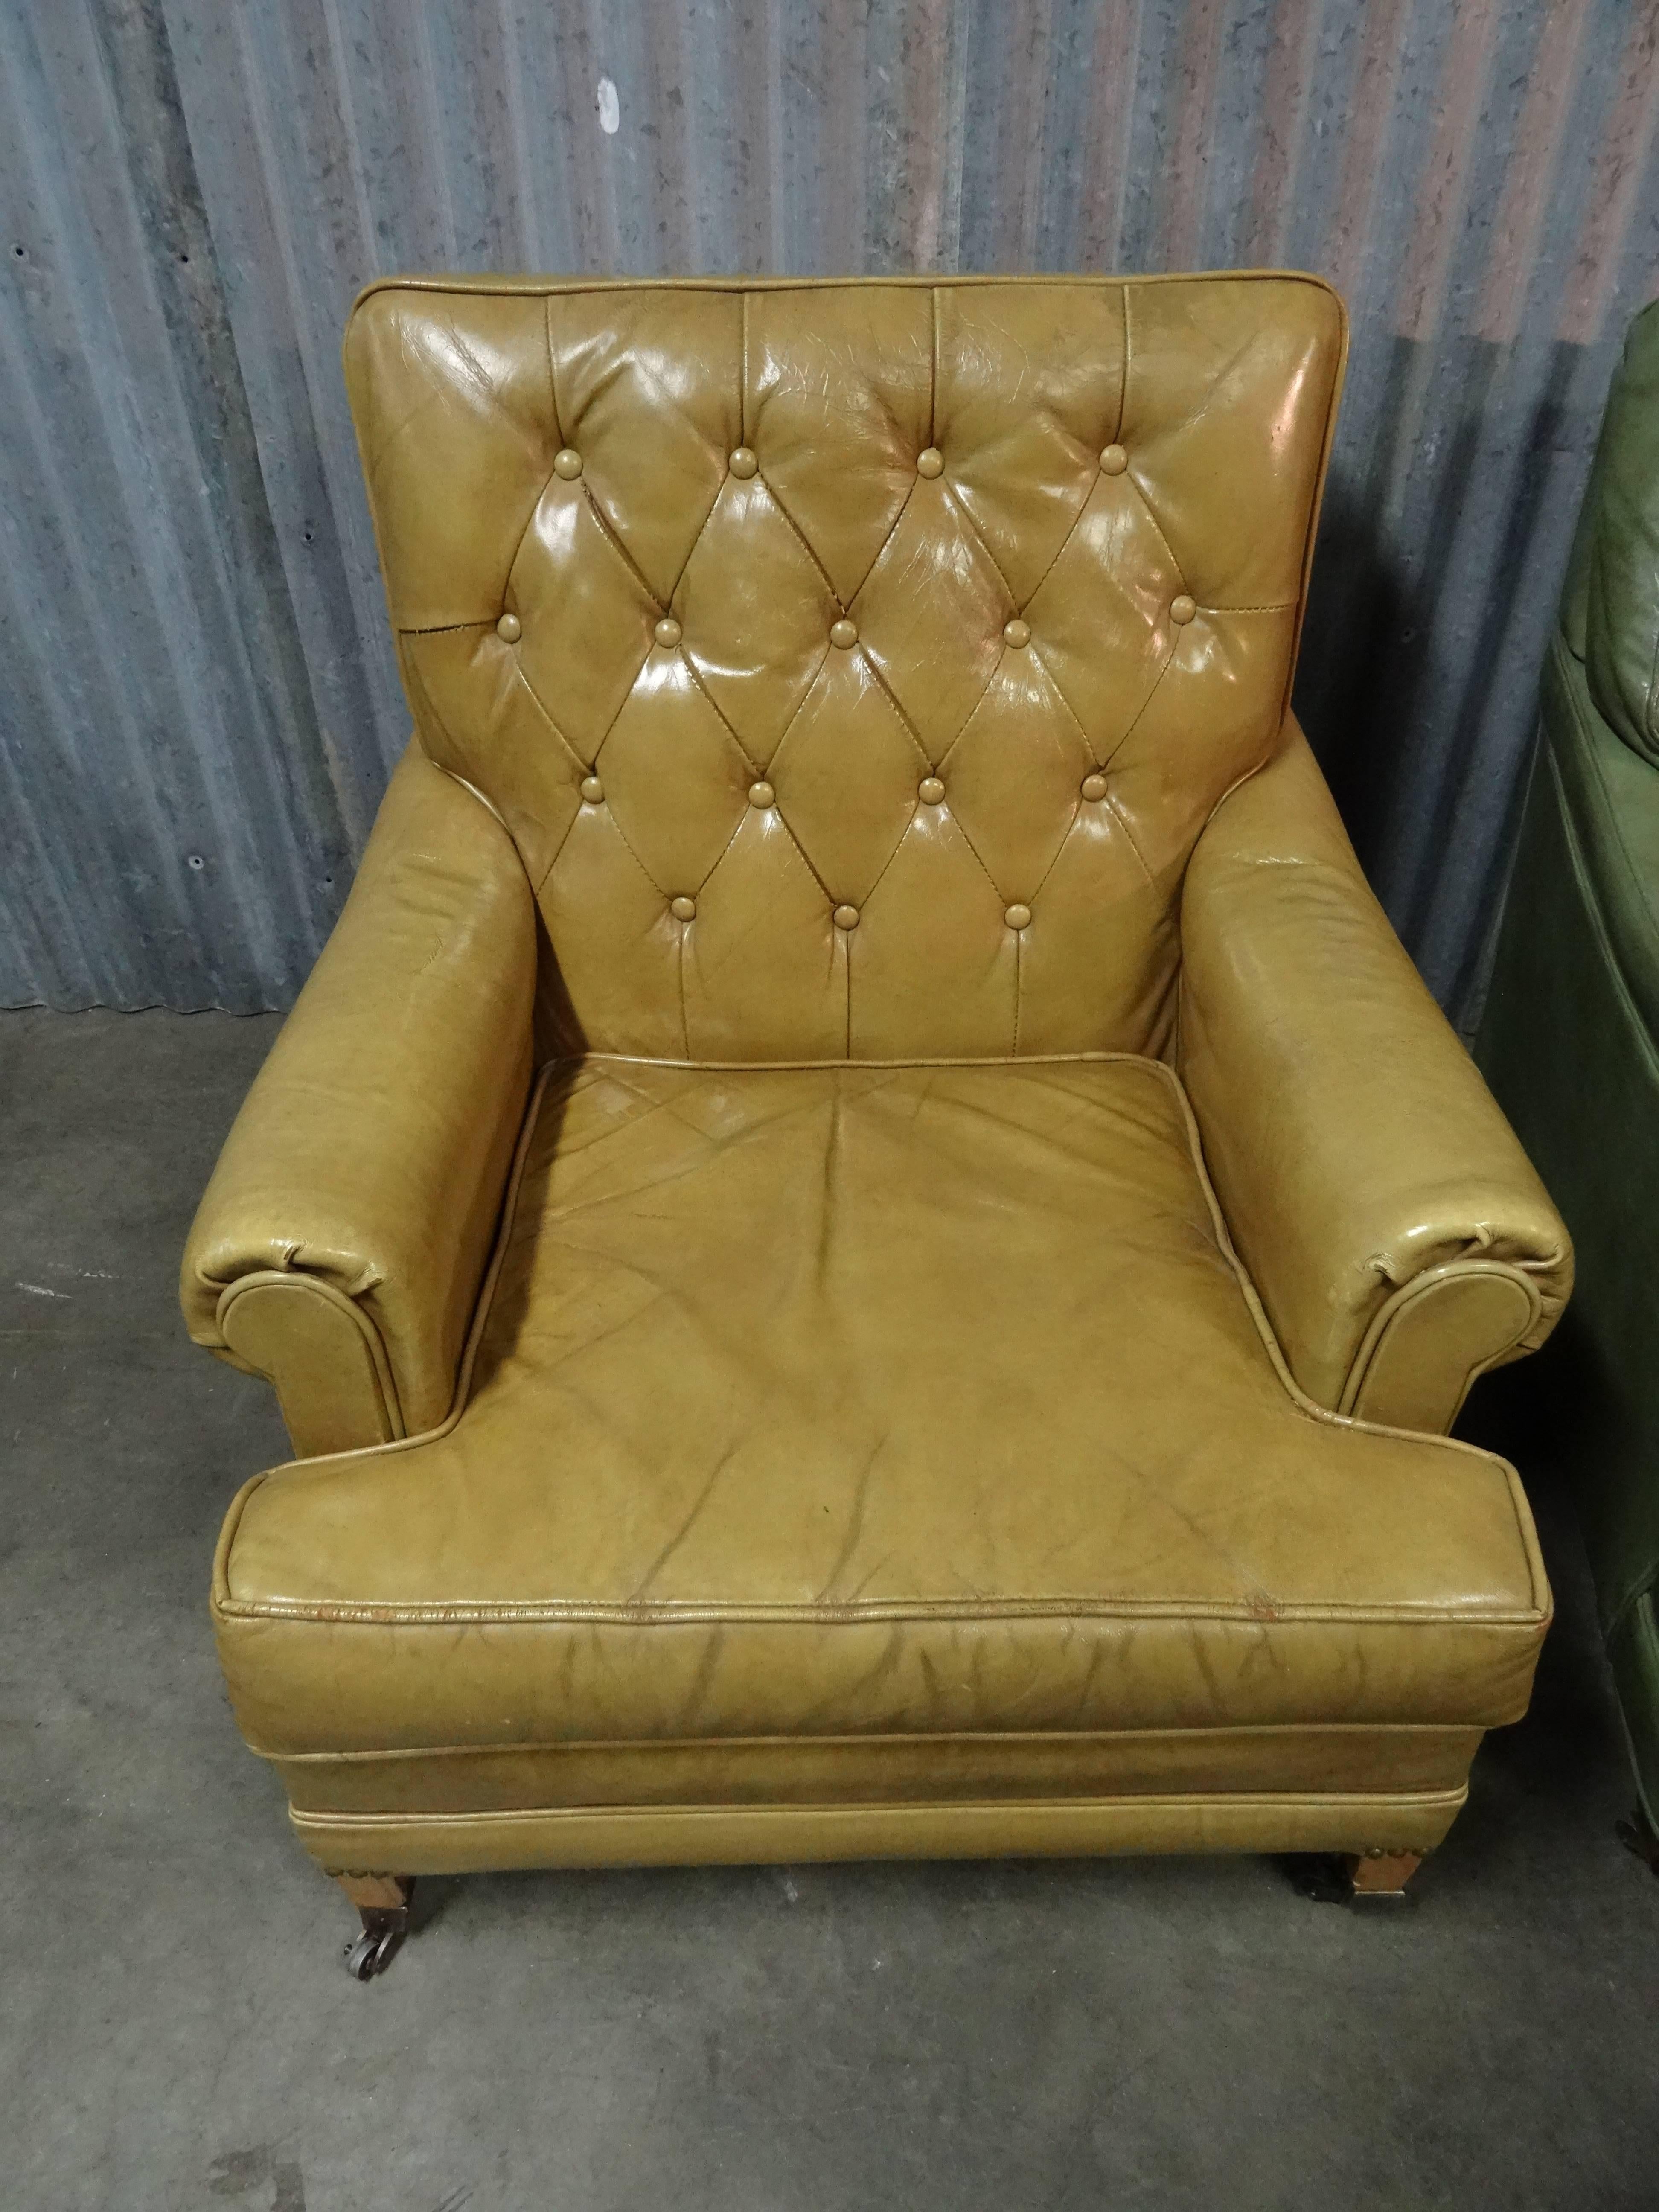 It took several years to collect this party of vintage, leather chairs with two ottomans. None are perfect, all are fantastic! Measurements of each chair are all within 1-2 inches of each other. Perfectly worn leather with exceptional patina. Extra